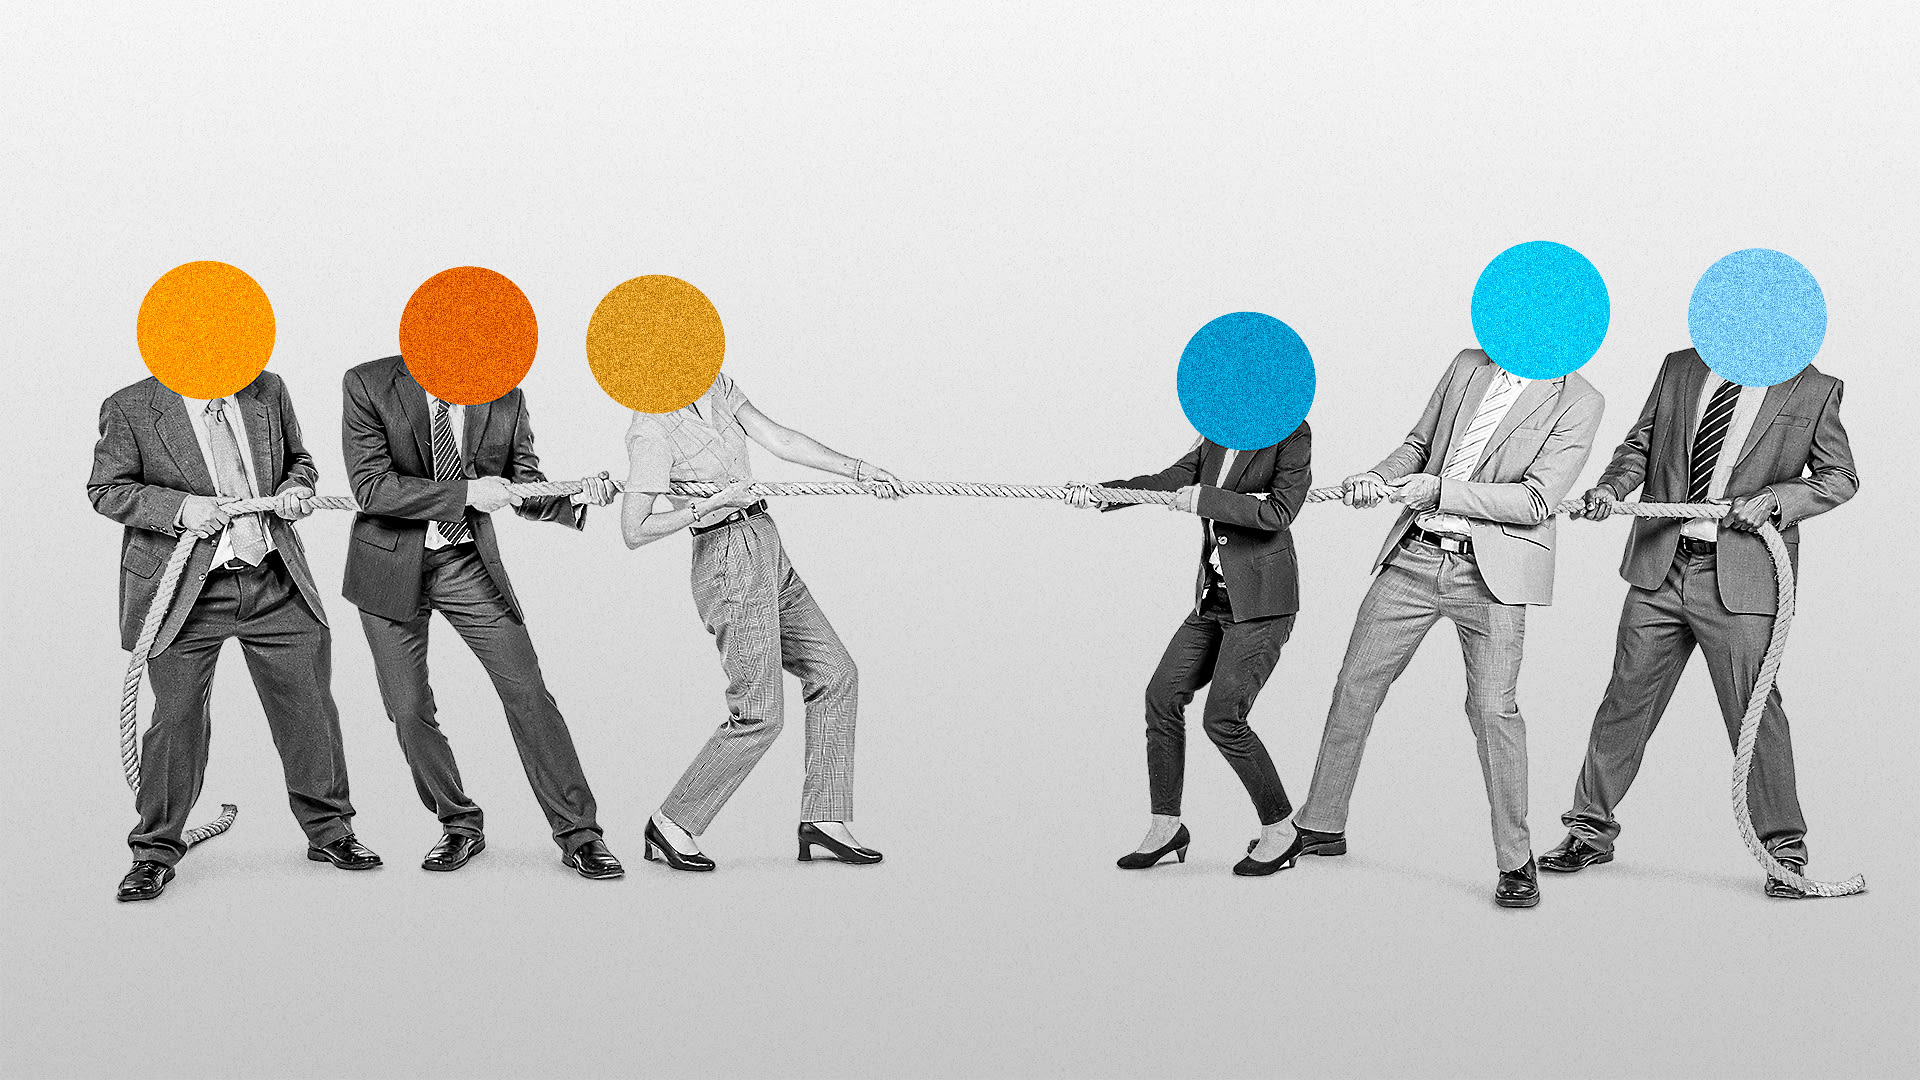 This technique can help diverse teams deal with conflict effectively